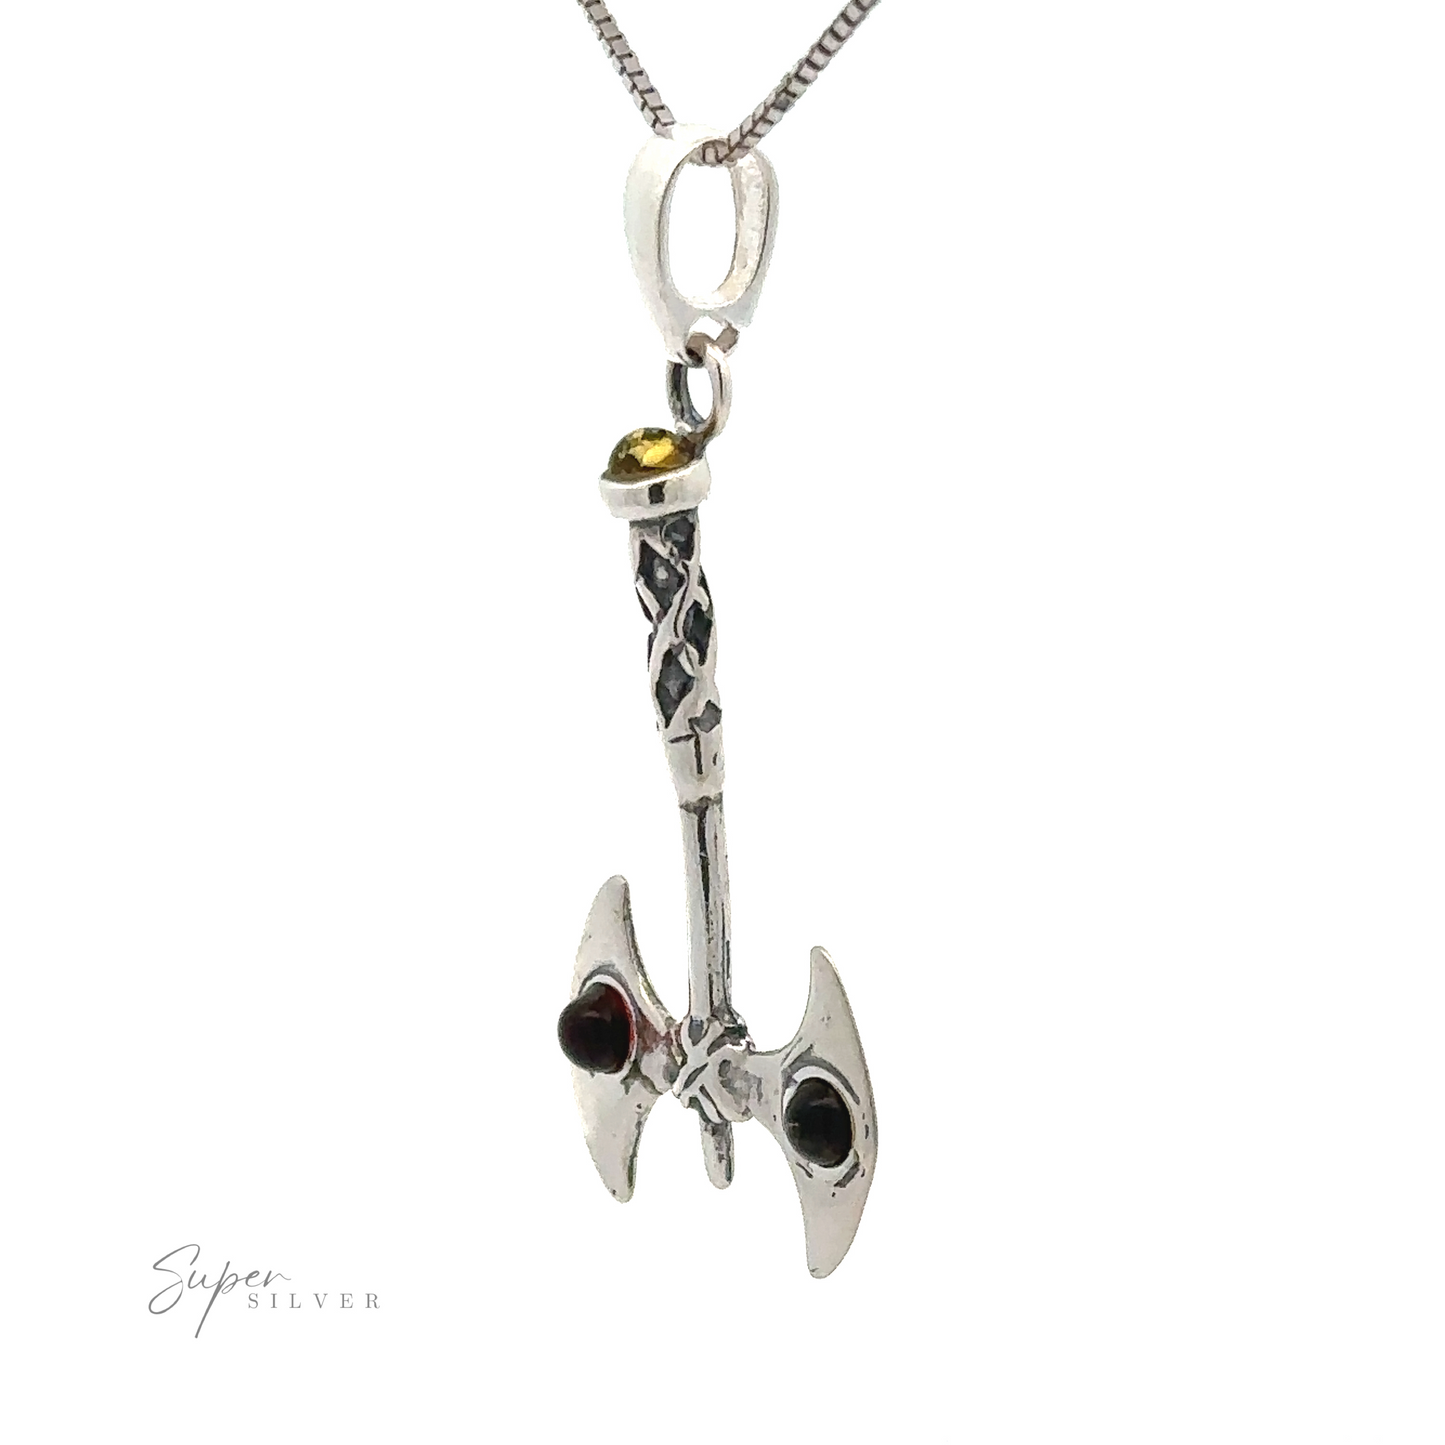 
                  
                    A silver necklace featuring an Amber Accented Battle Axe Pendant adorned with small yellow and dark red stones. The pendant hangs from a thin chain, exuding the spirit of warrior courage.
                  
                